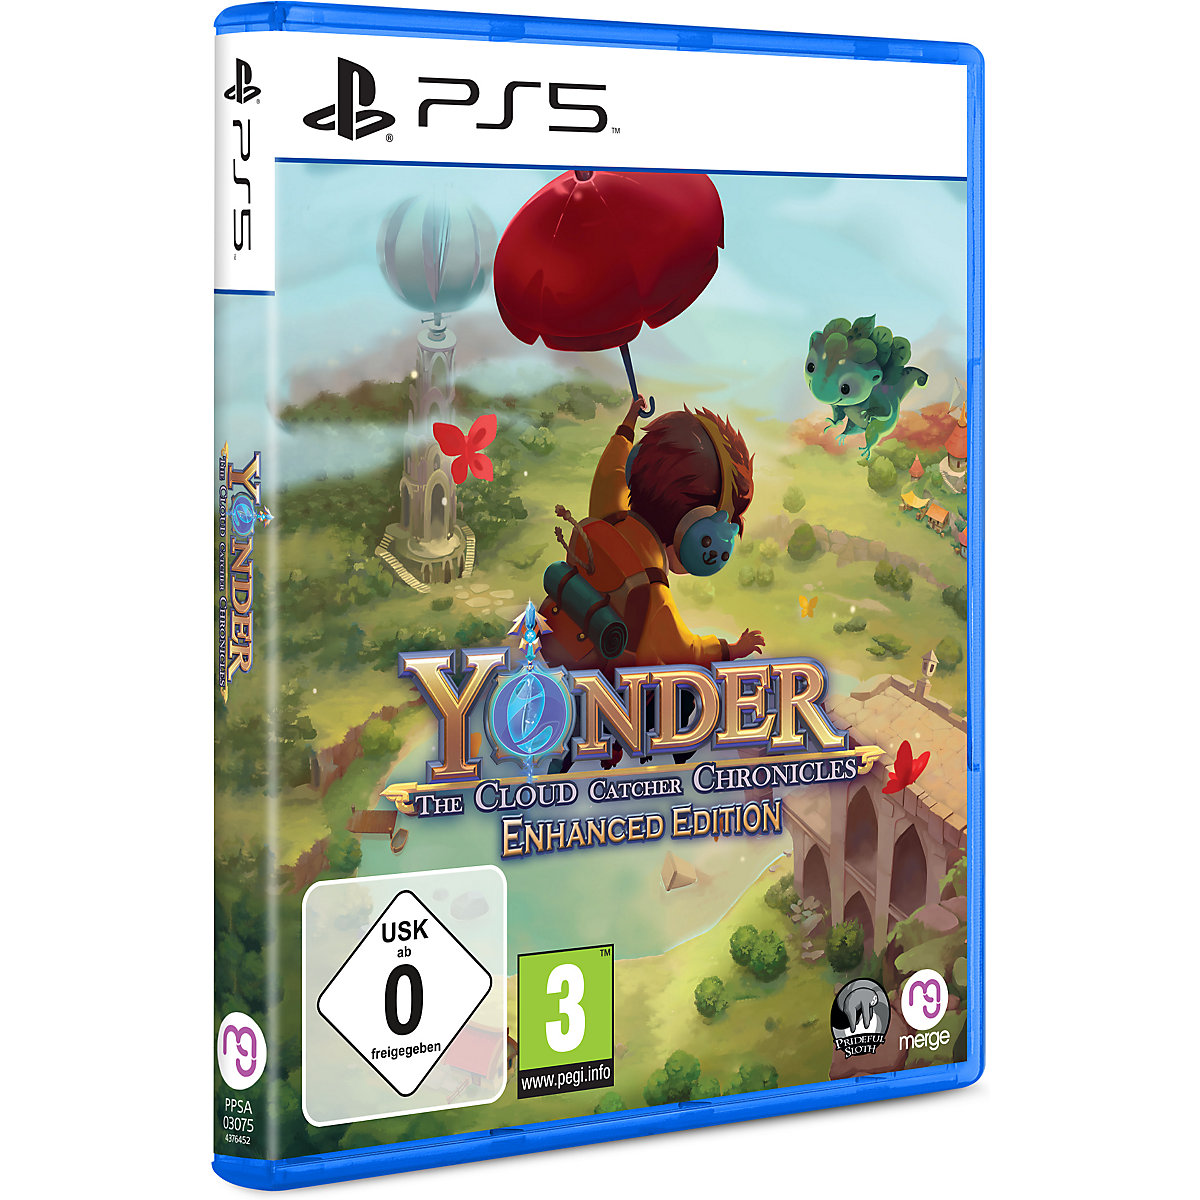 PS5 Yonder The Cloud Catcher